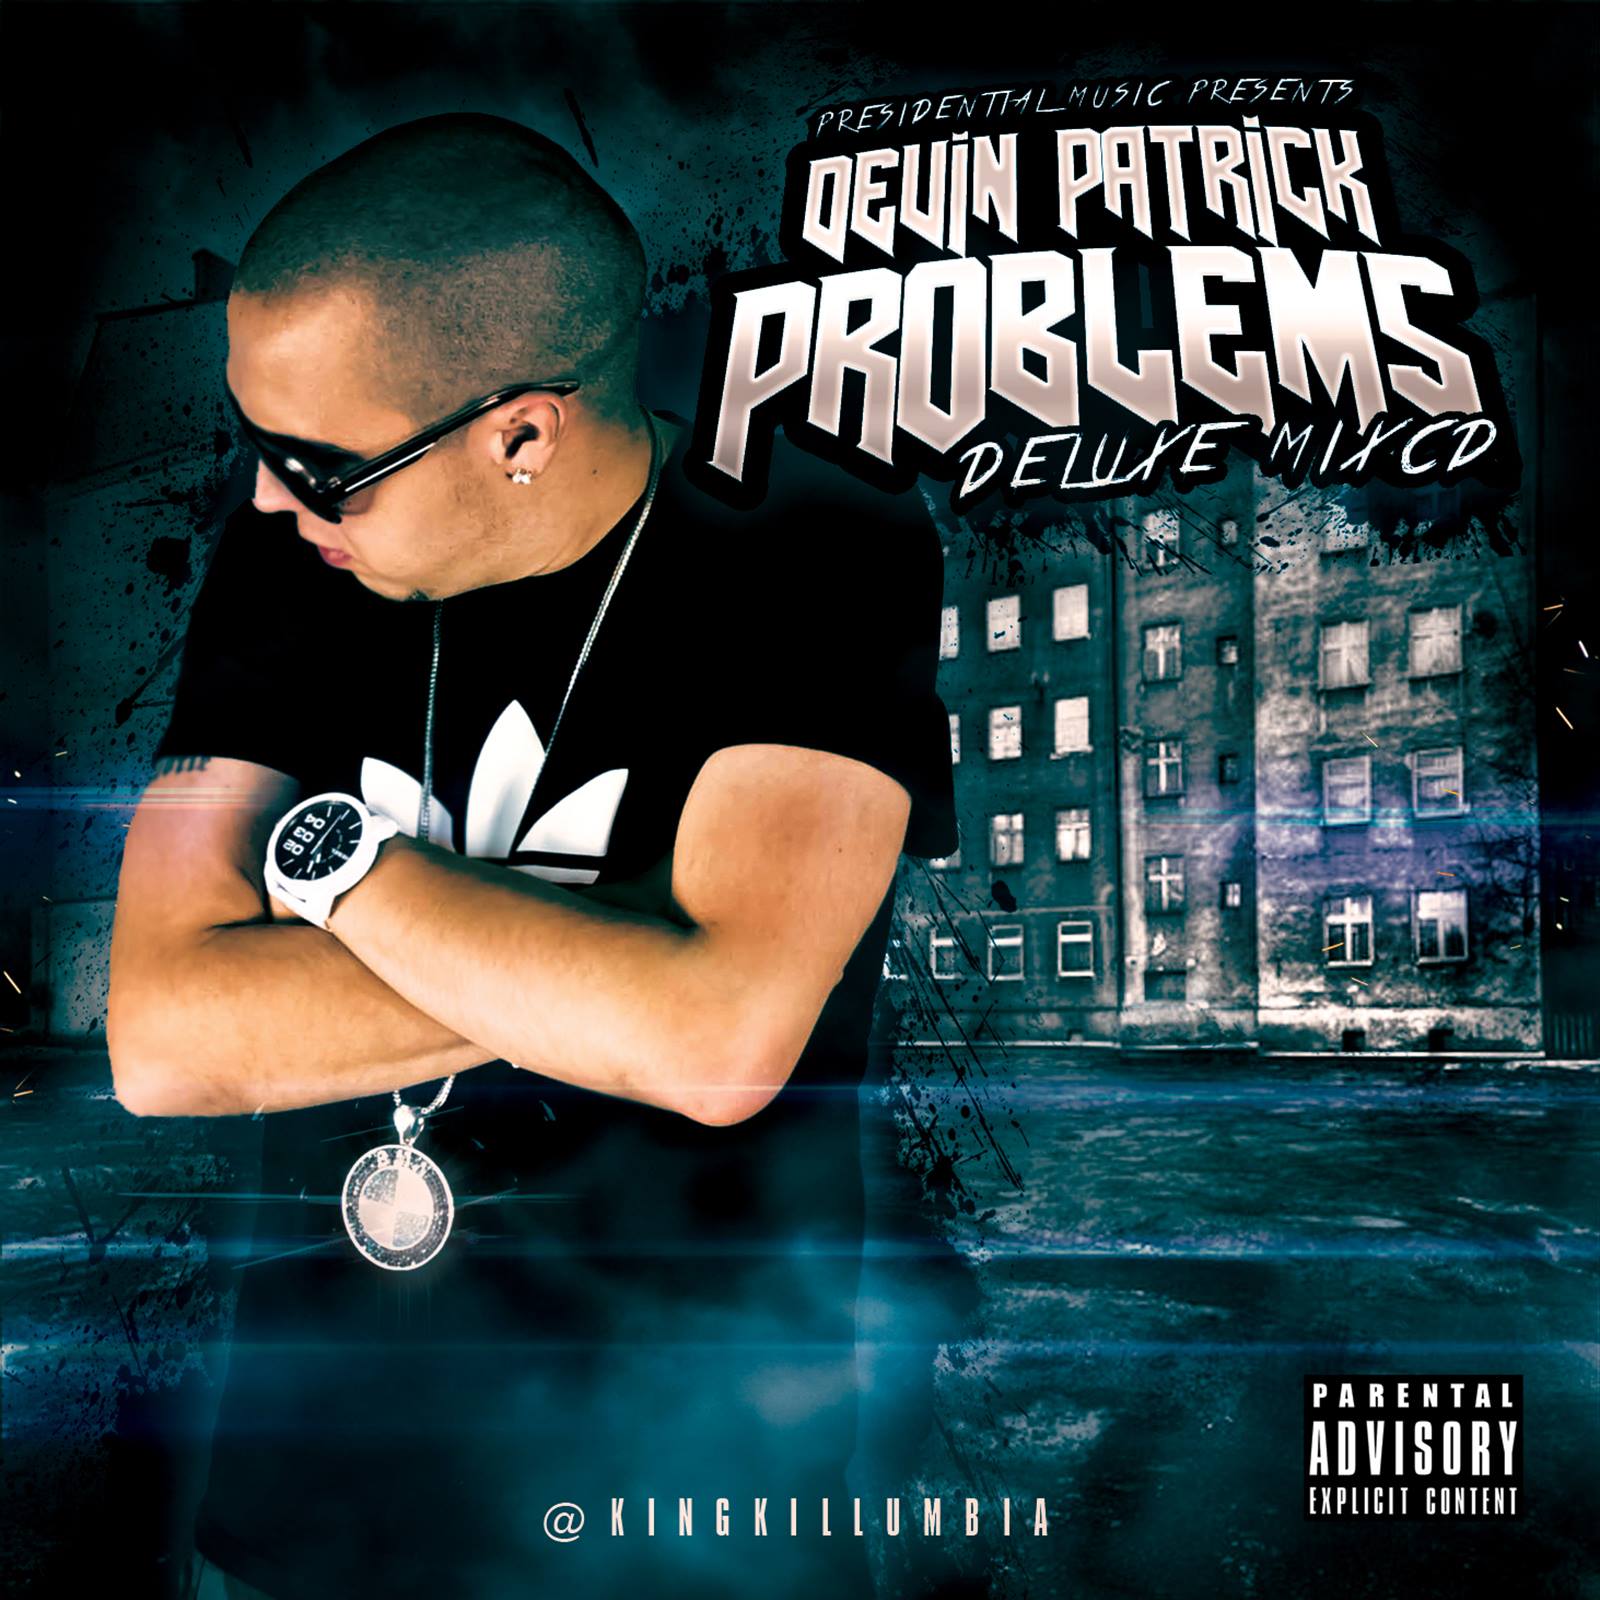 Devin Patrick’s Deluxe Mix CD “Problems” Release